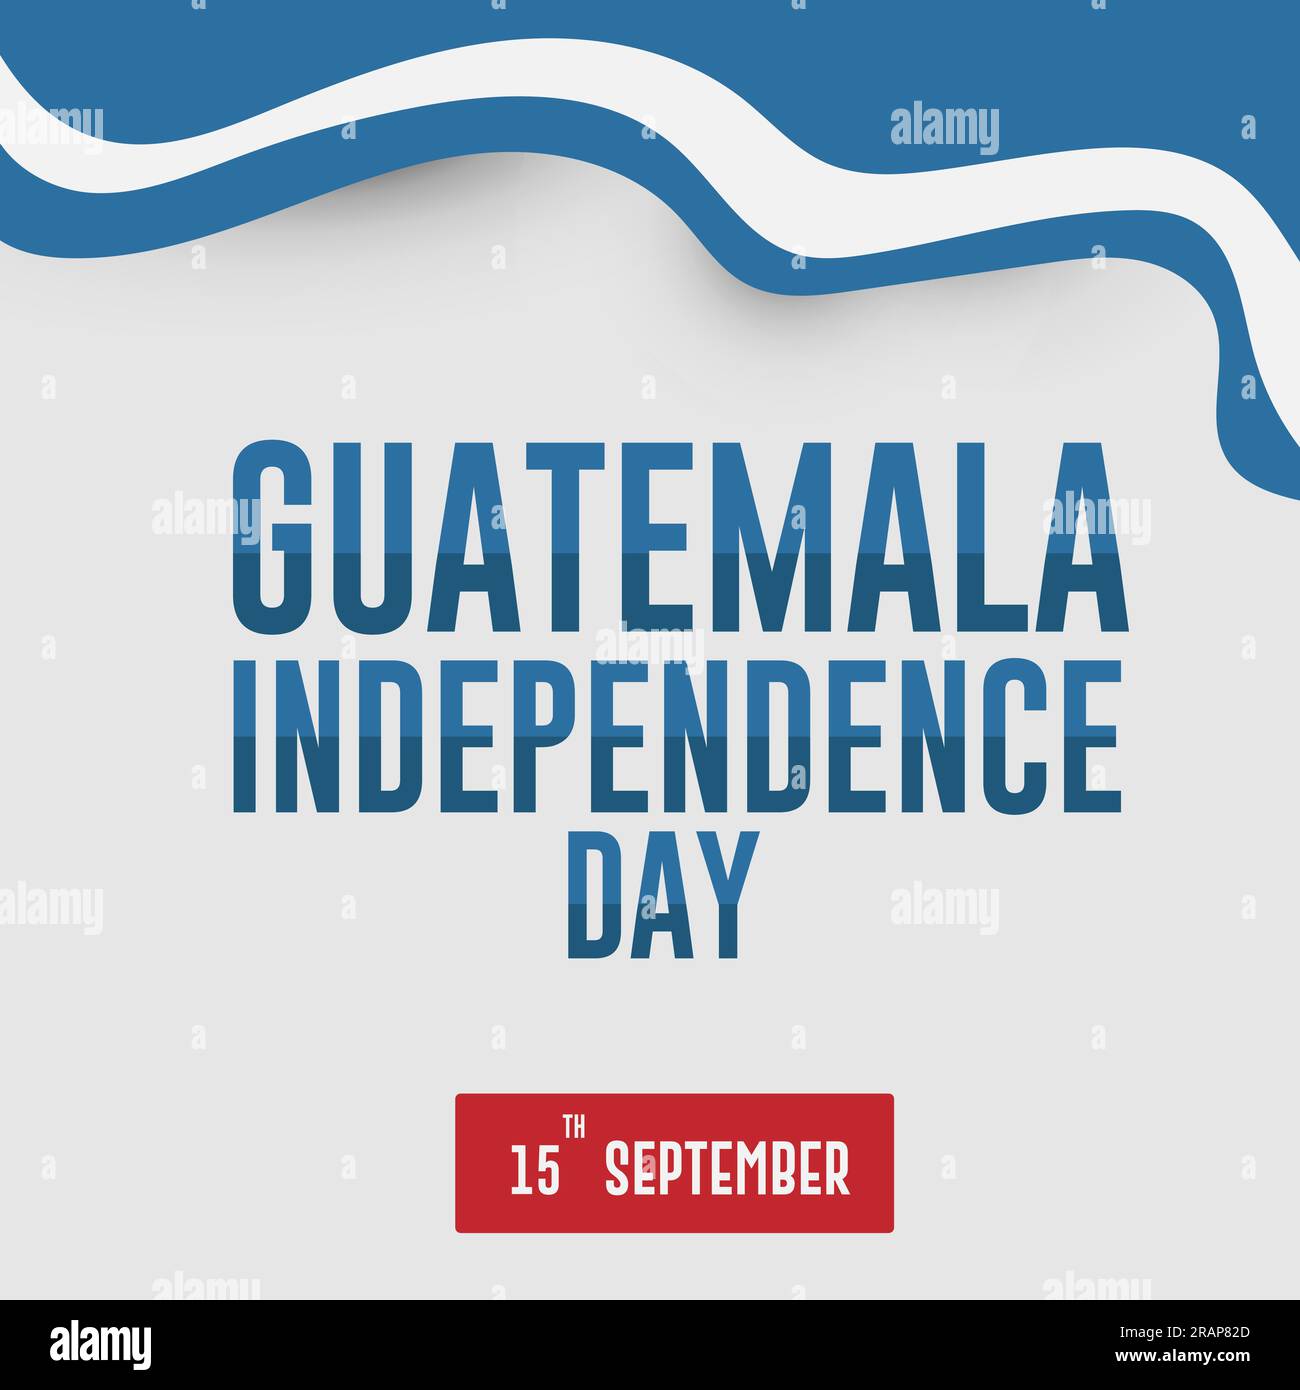 Guatemala Independence Day vector poster design illustration. Stock Vector